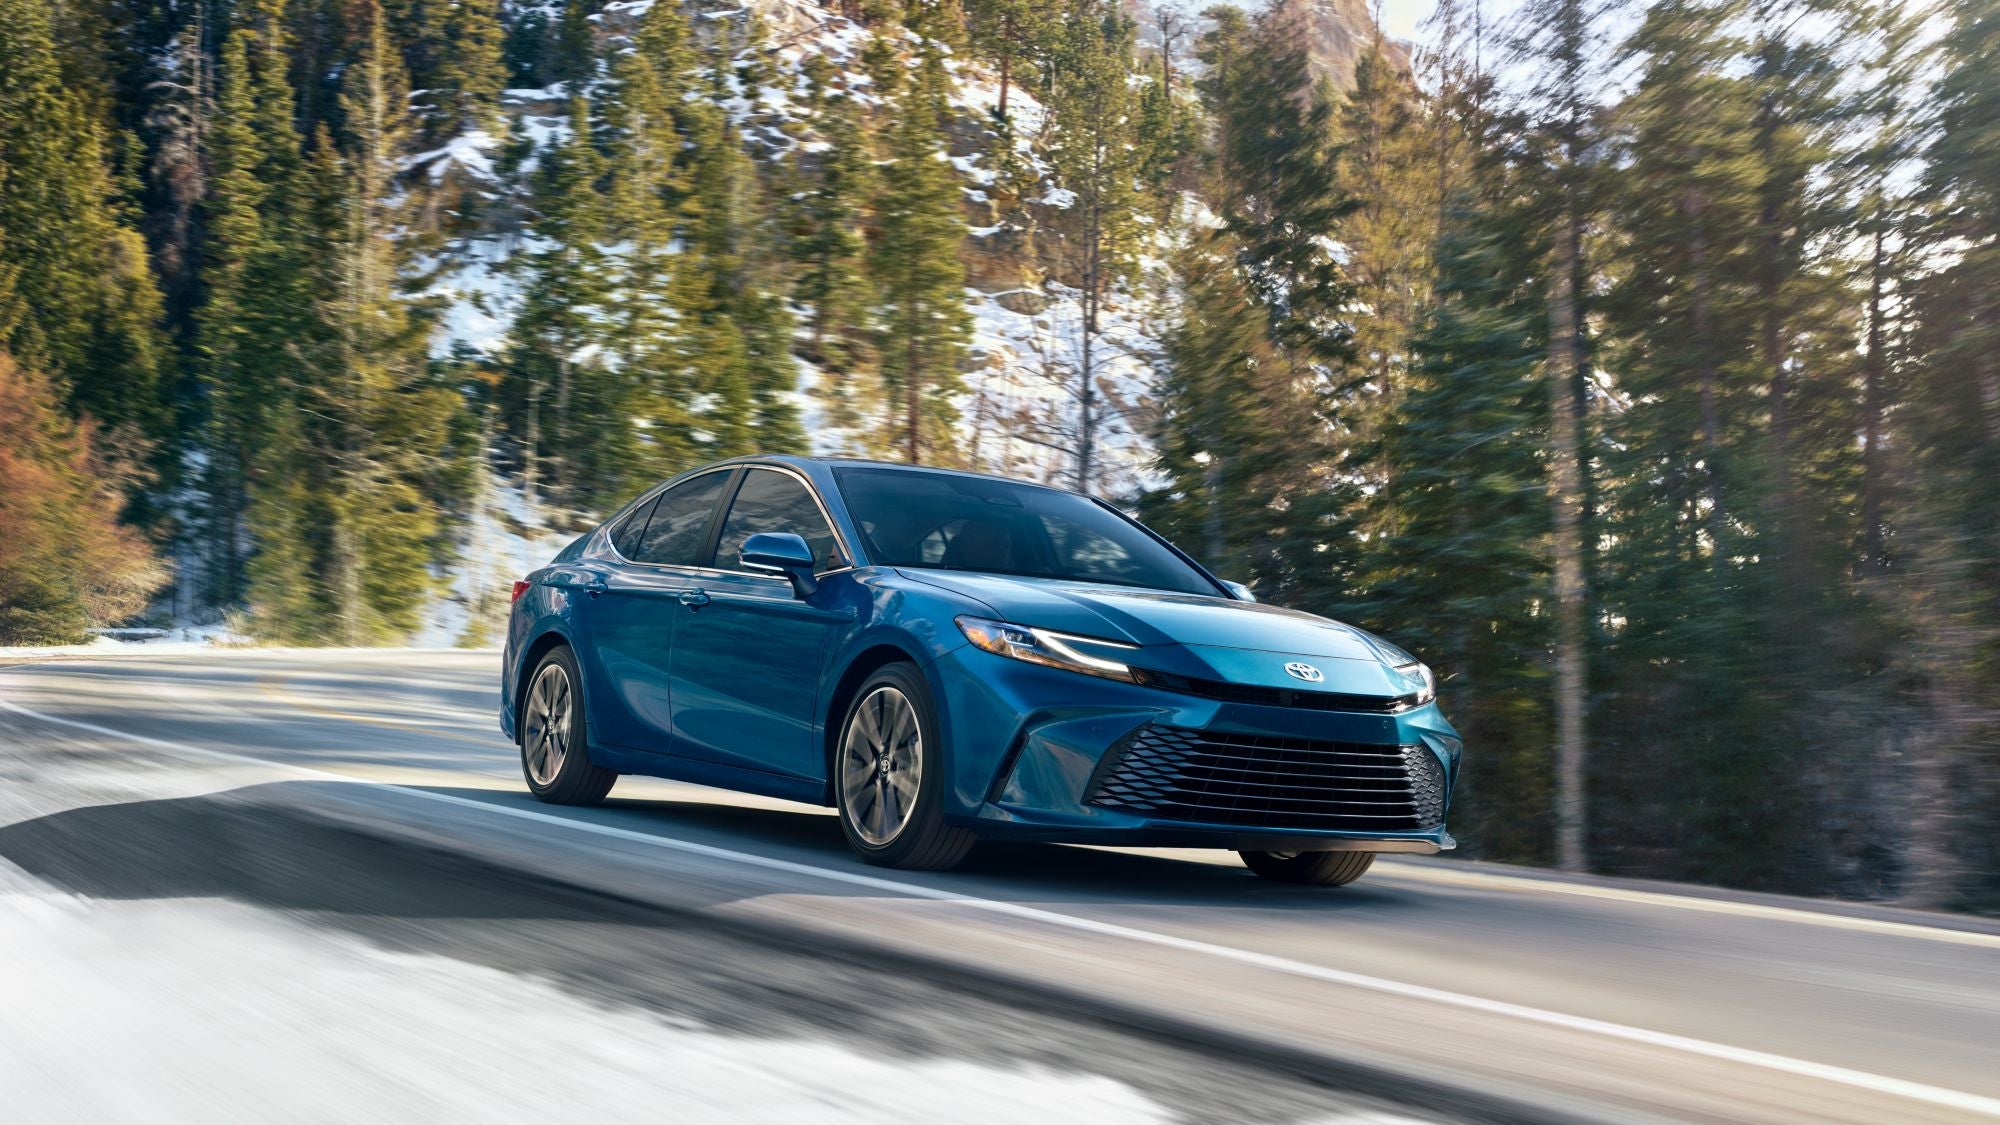 New Upcoming 2025 Toyota Camry Hybrid AWD Sedan - Falmouth Toyota Dealership, Bourne MA - Serving Cape Cod, Hyannis, Plymouth & more